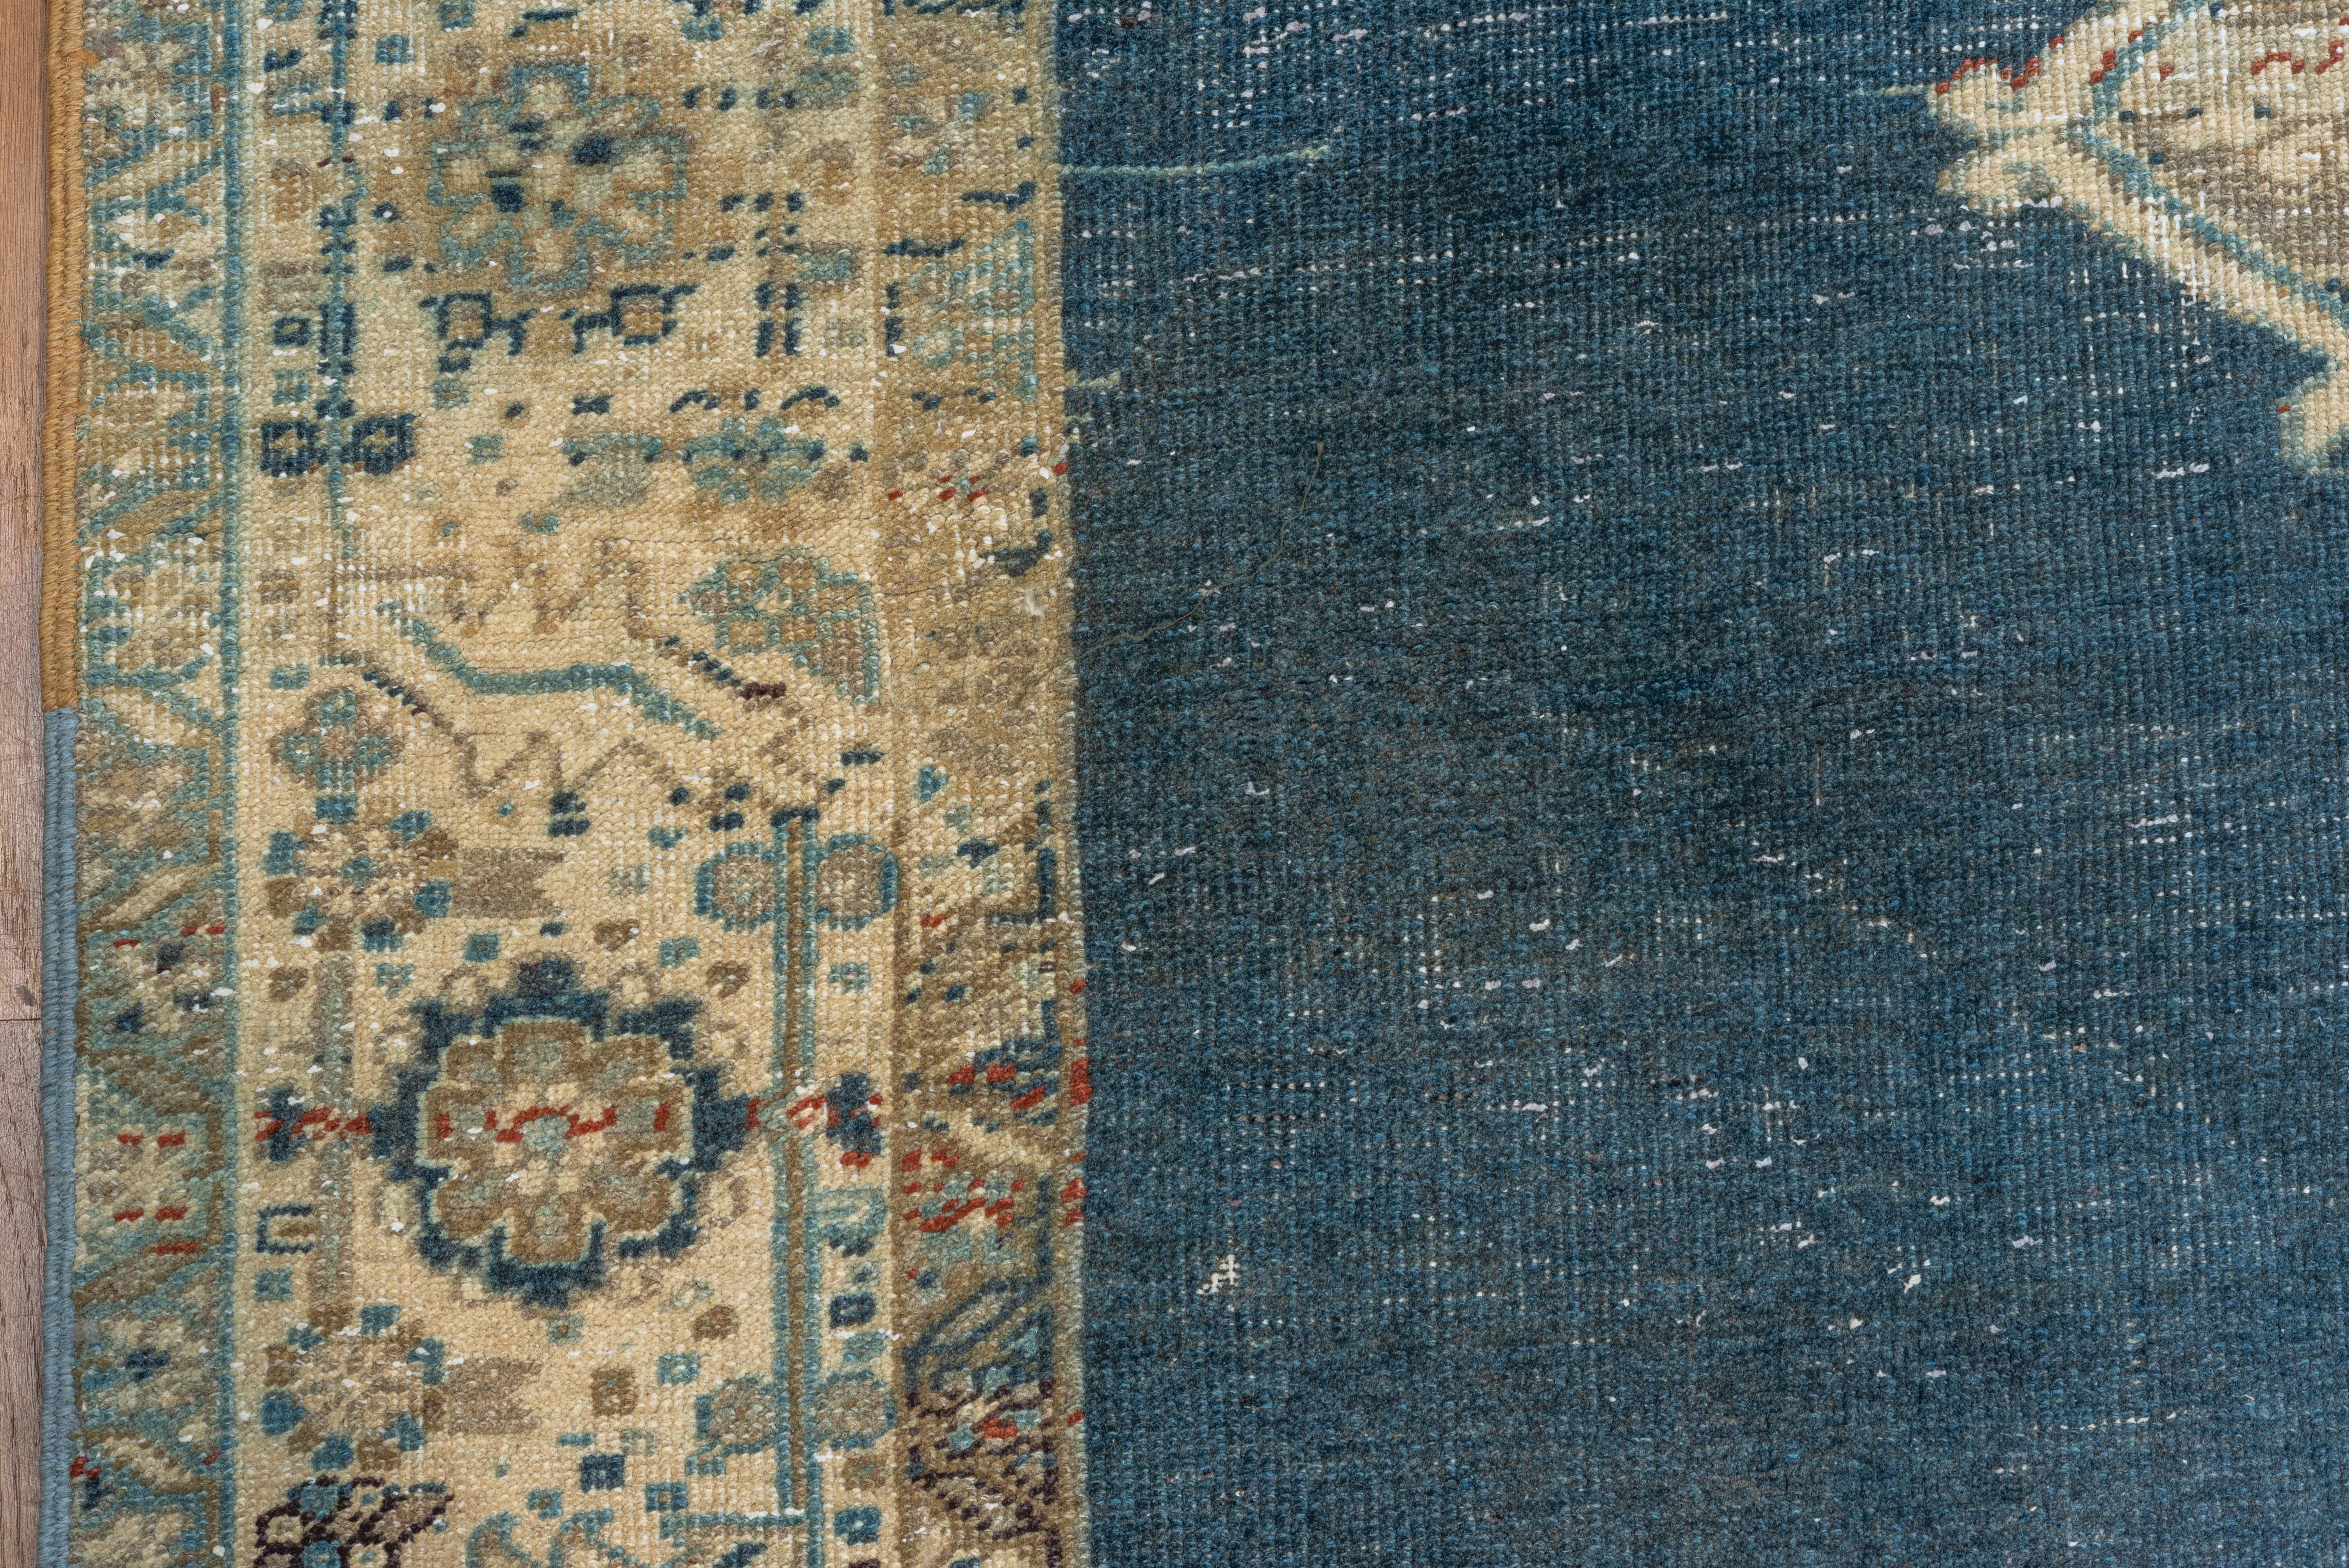 Eliko Rugs by David Ariel Antique Heriz Rug, Teal Subfield, Center Medallion In Good Condition For Sale In New York, NY